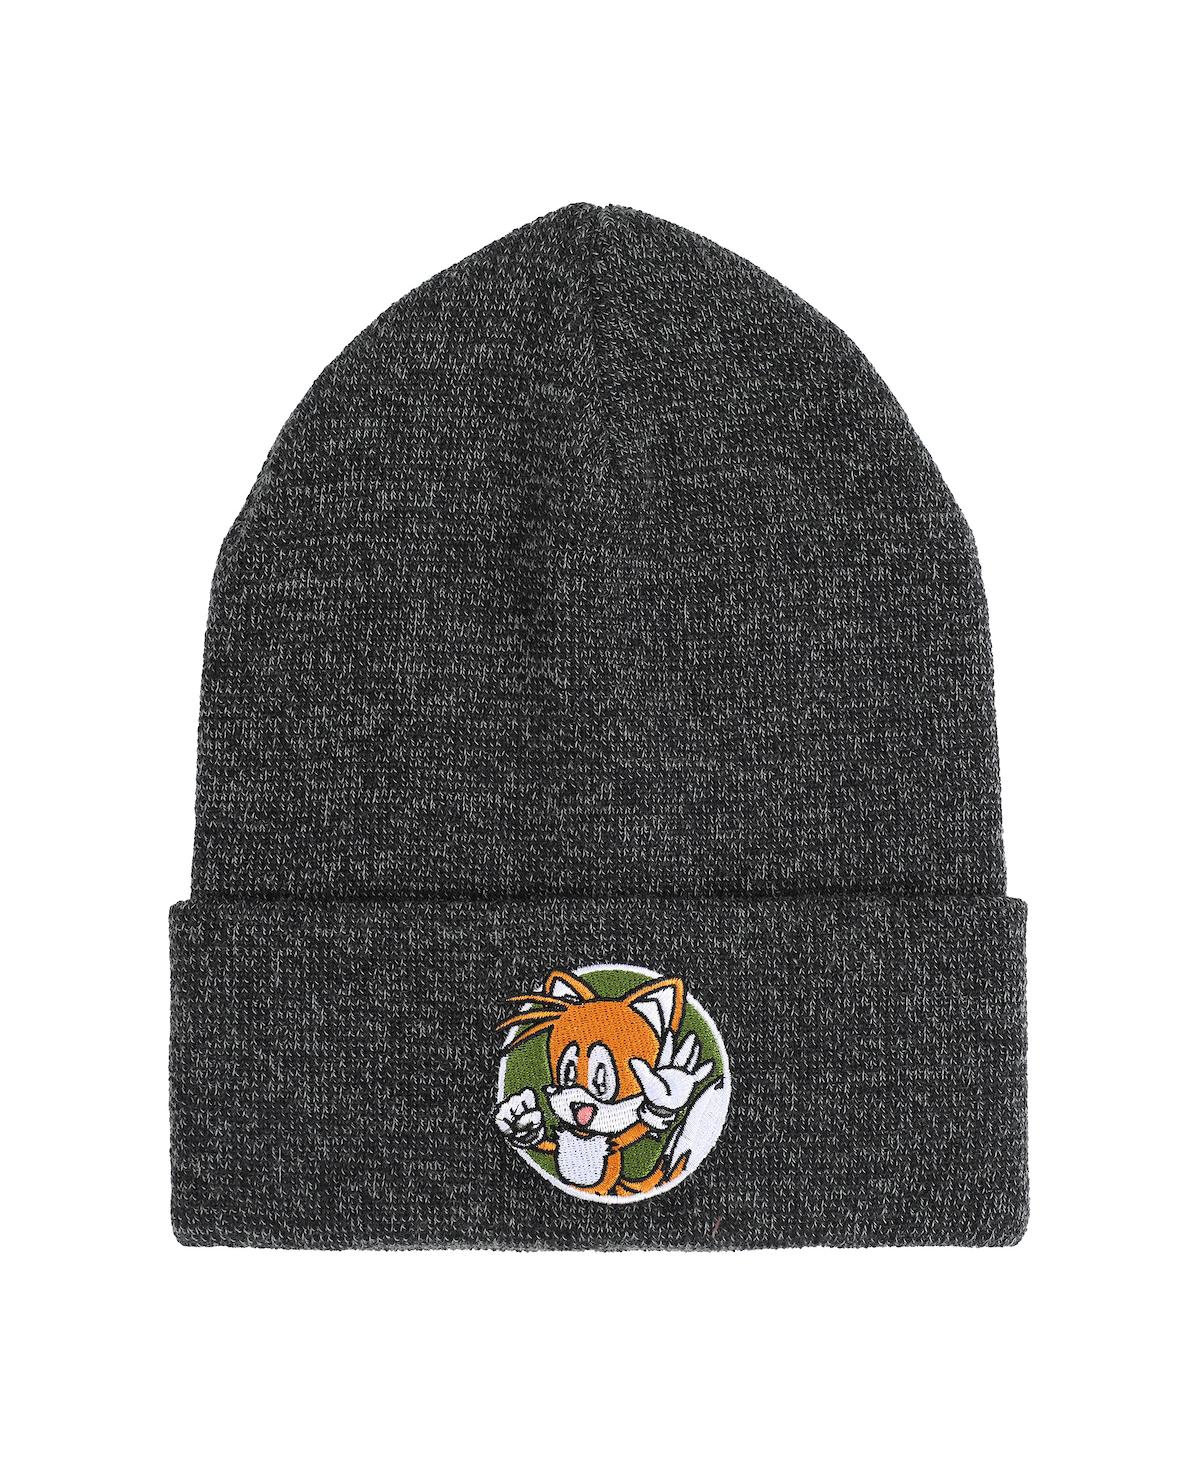 Men's Embroidered Tails Adult Cuffed Beanie - Gray